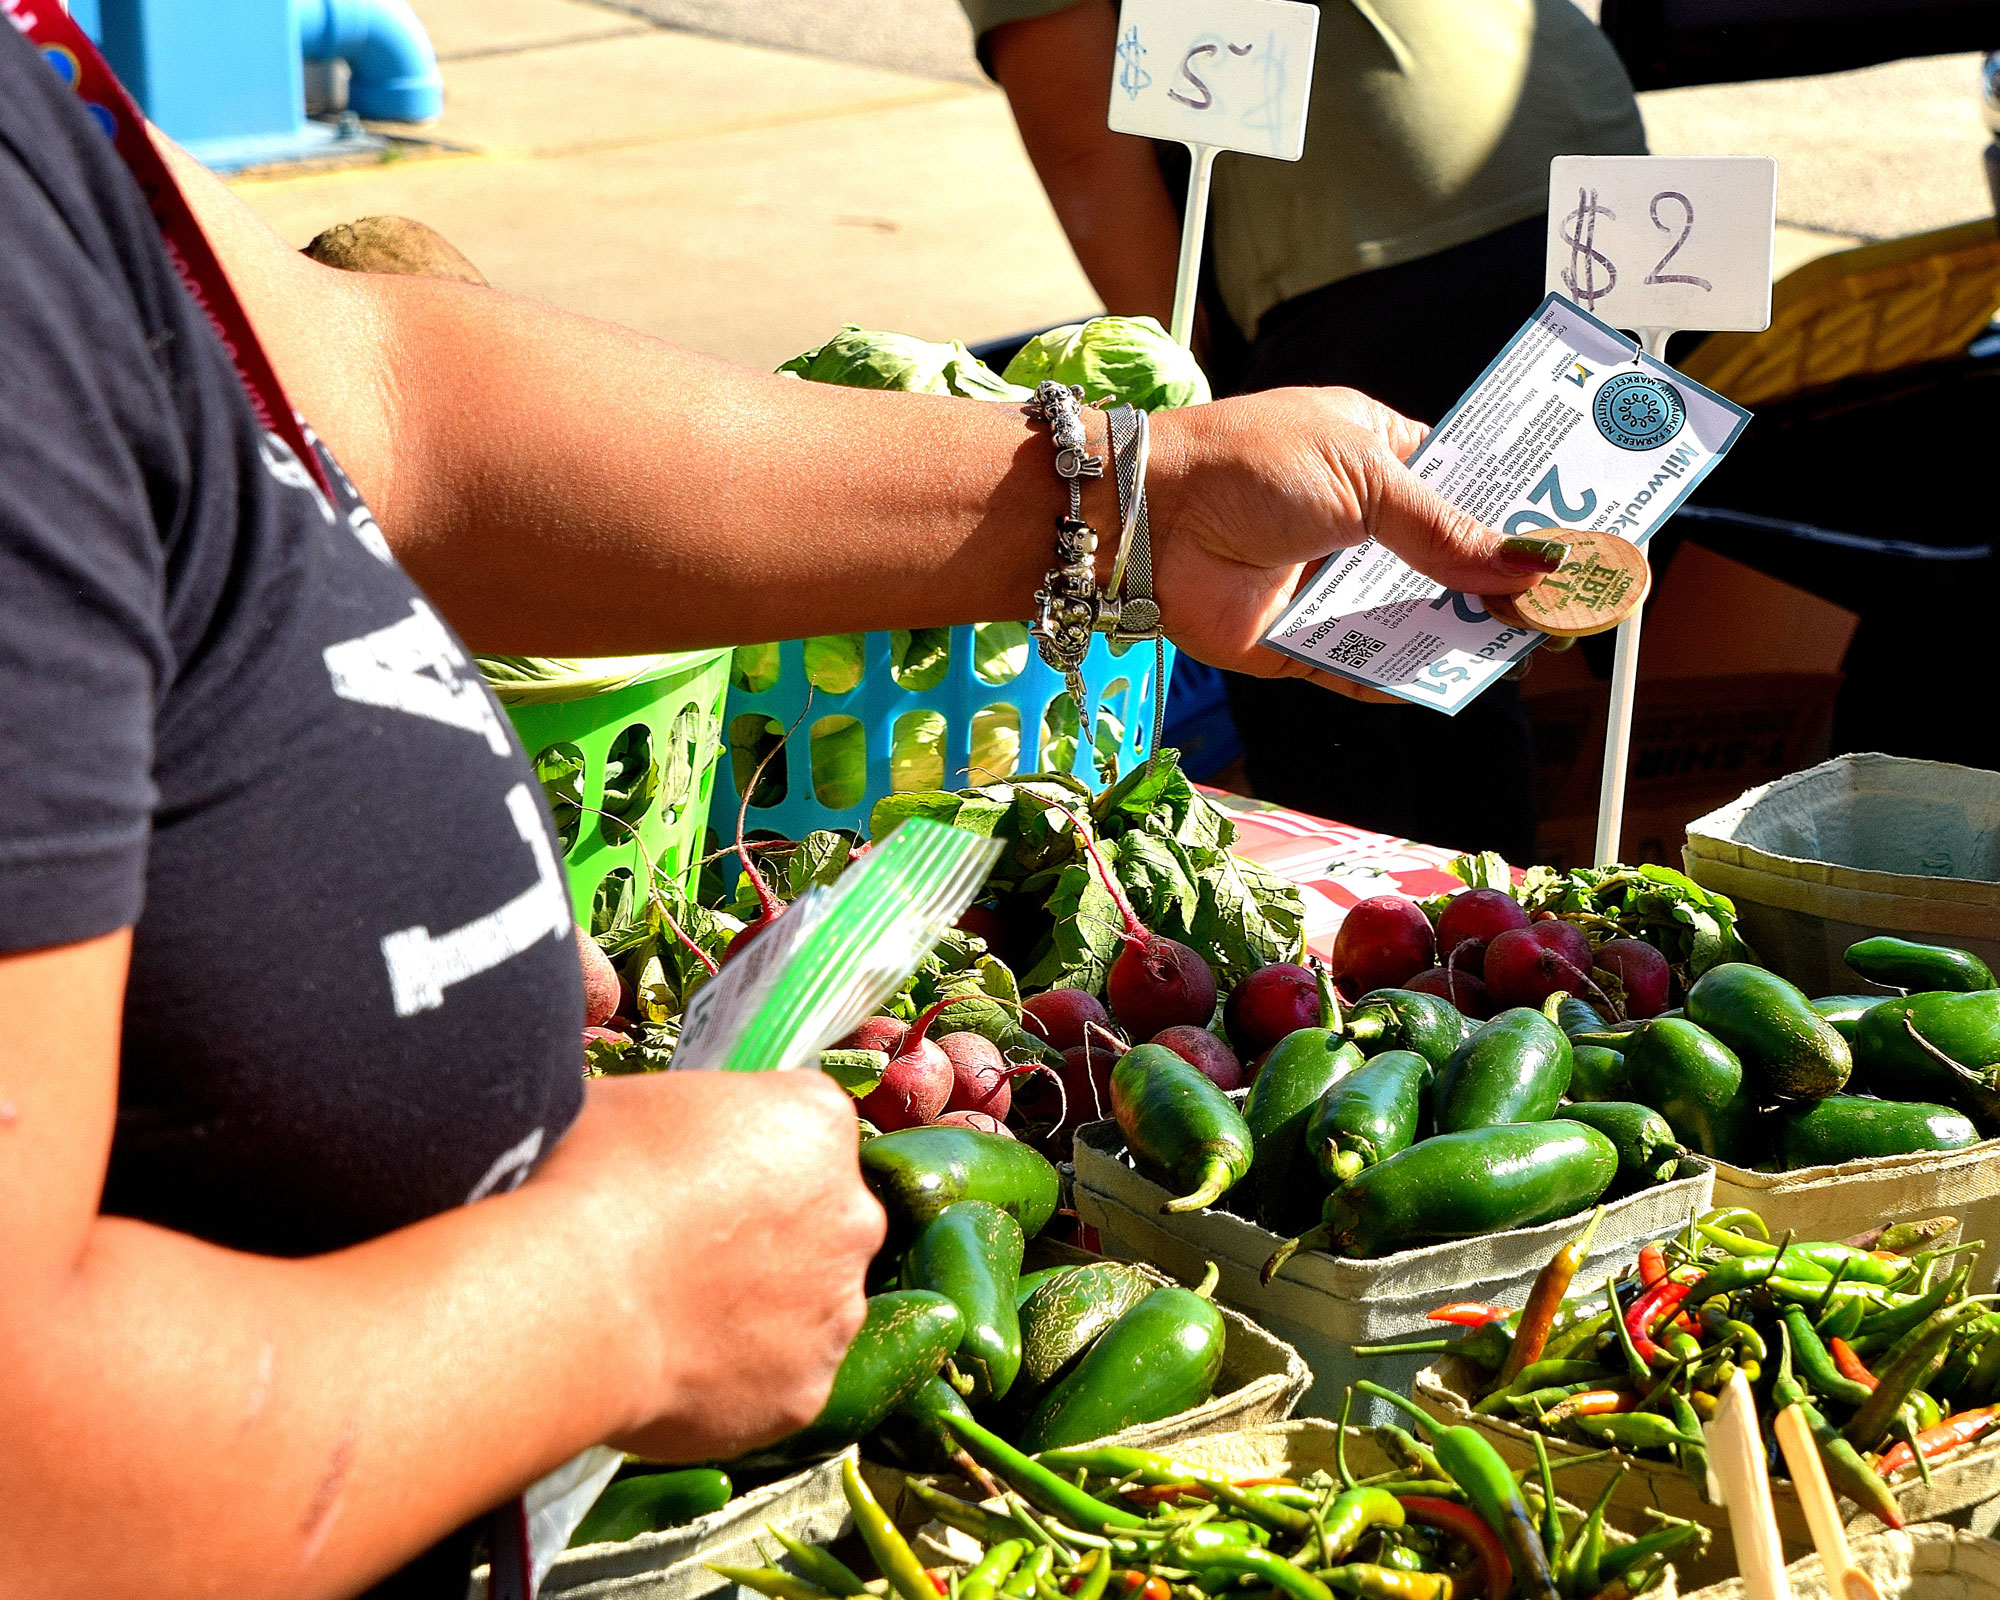 Person handing voucher to farmers market vendor to purchase produce